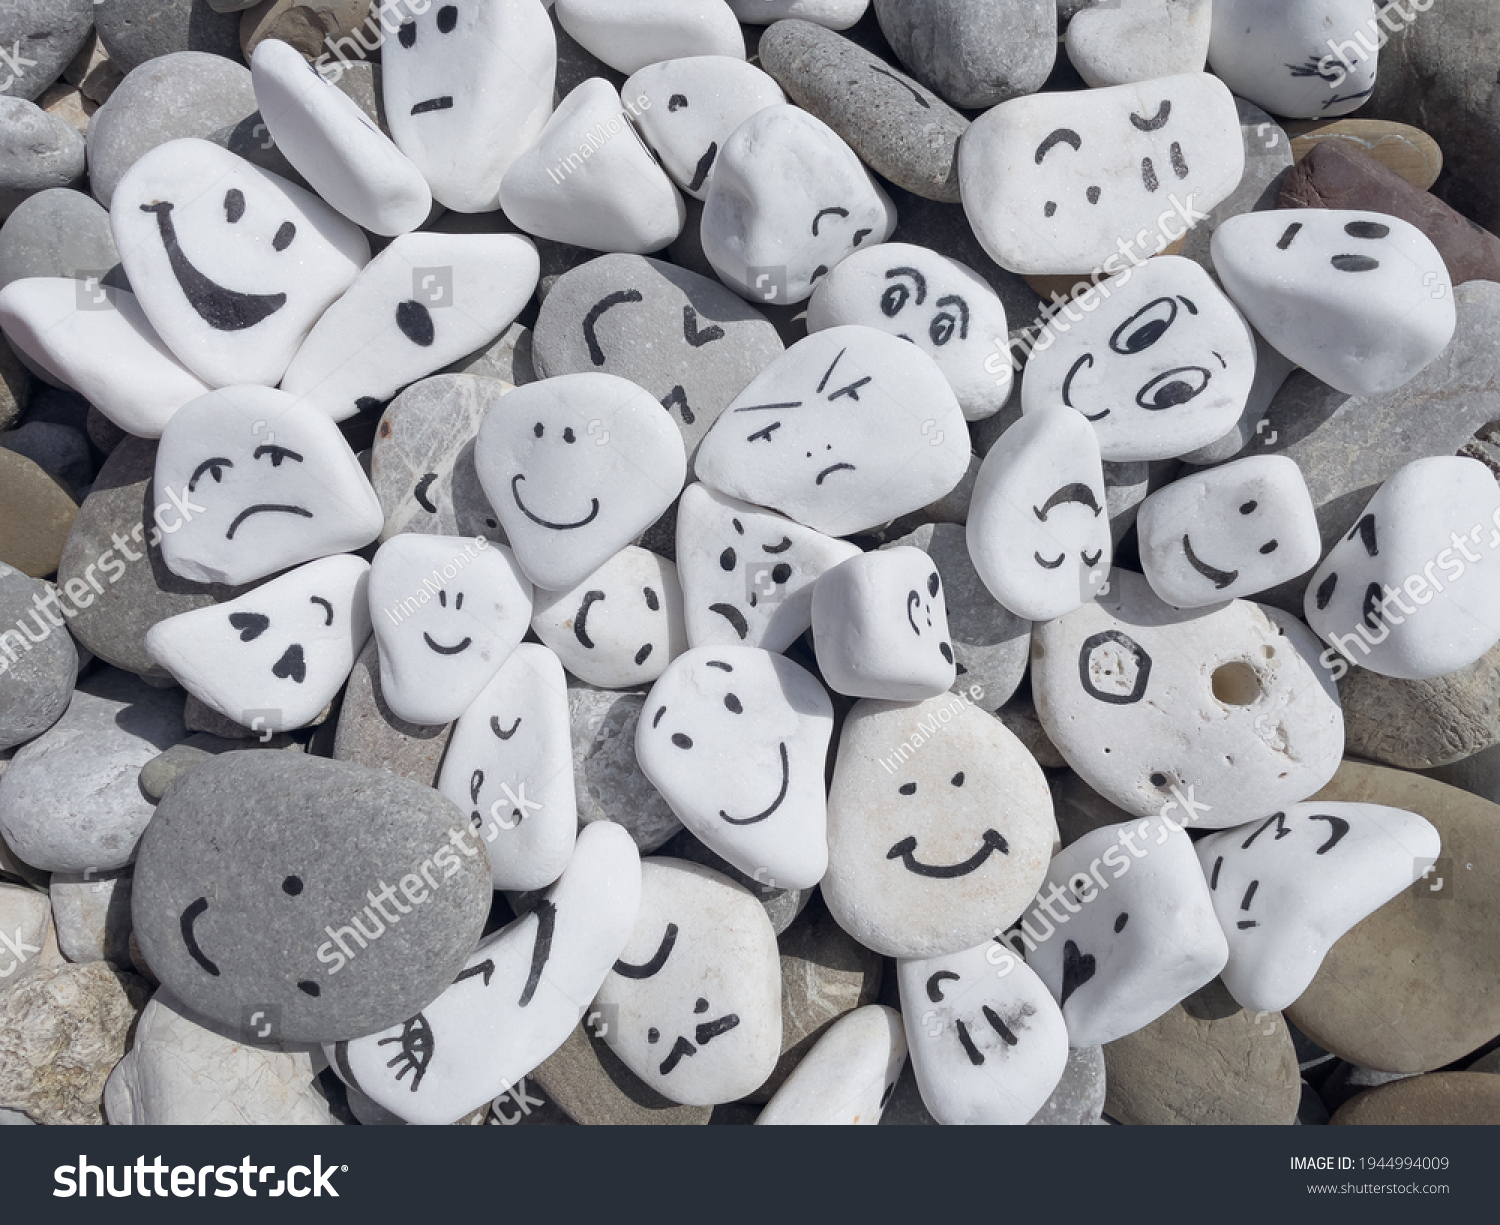 Emotion management concept, stones with painted faces symbolize different emotions. We are all different, but all together, learning to manage emotions. Emotional intelligence, role model. Good mood. #1944994009